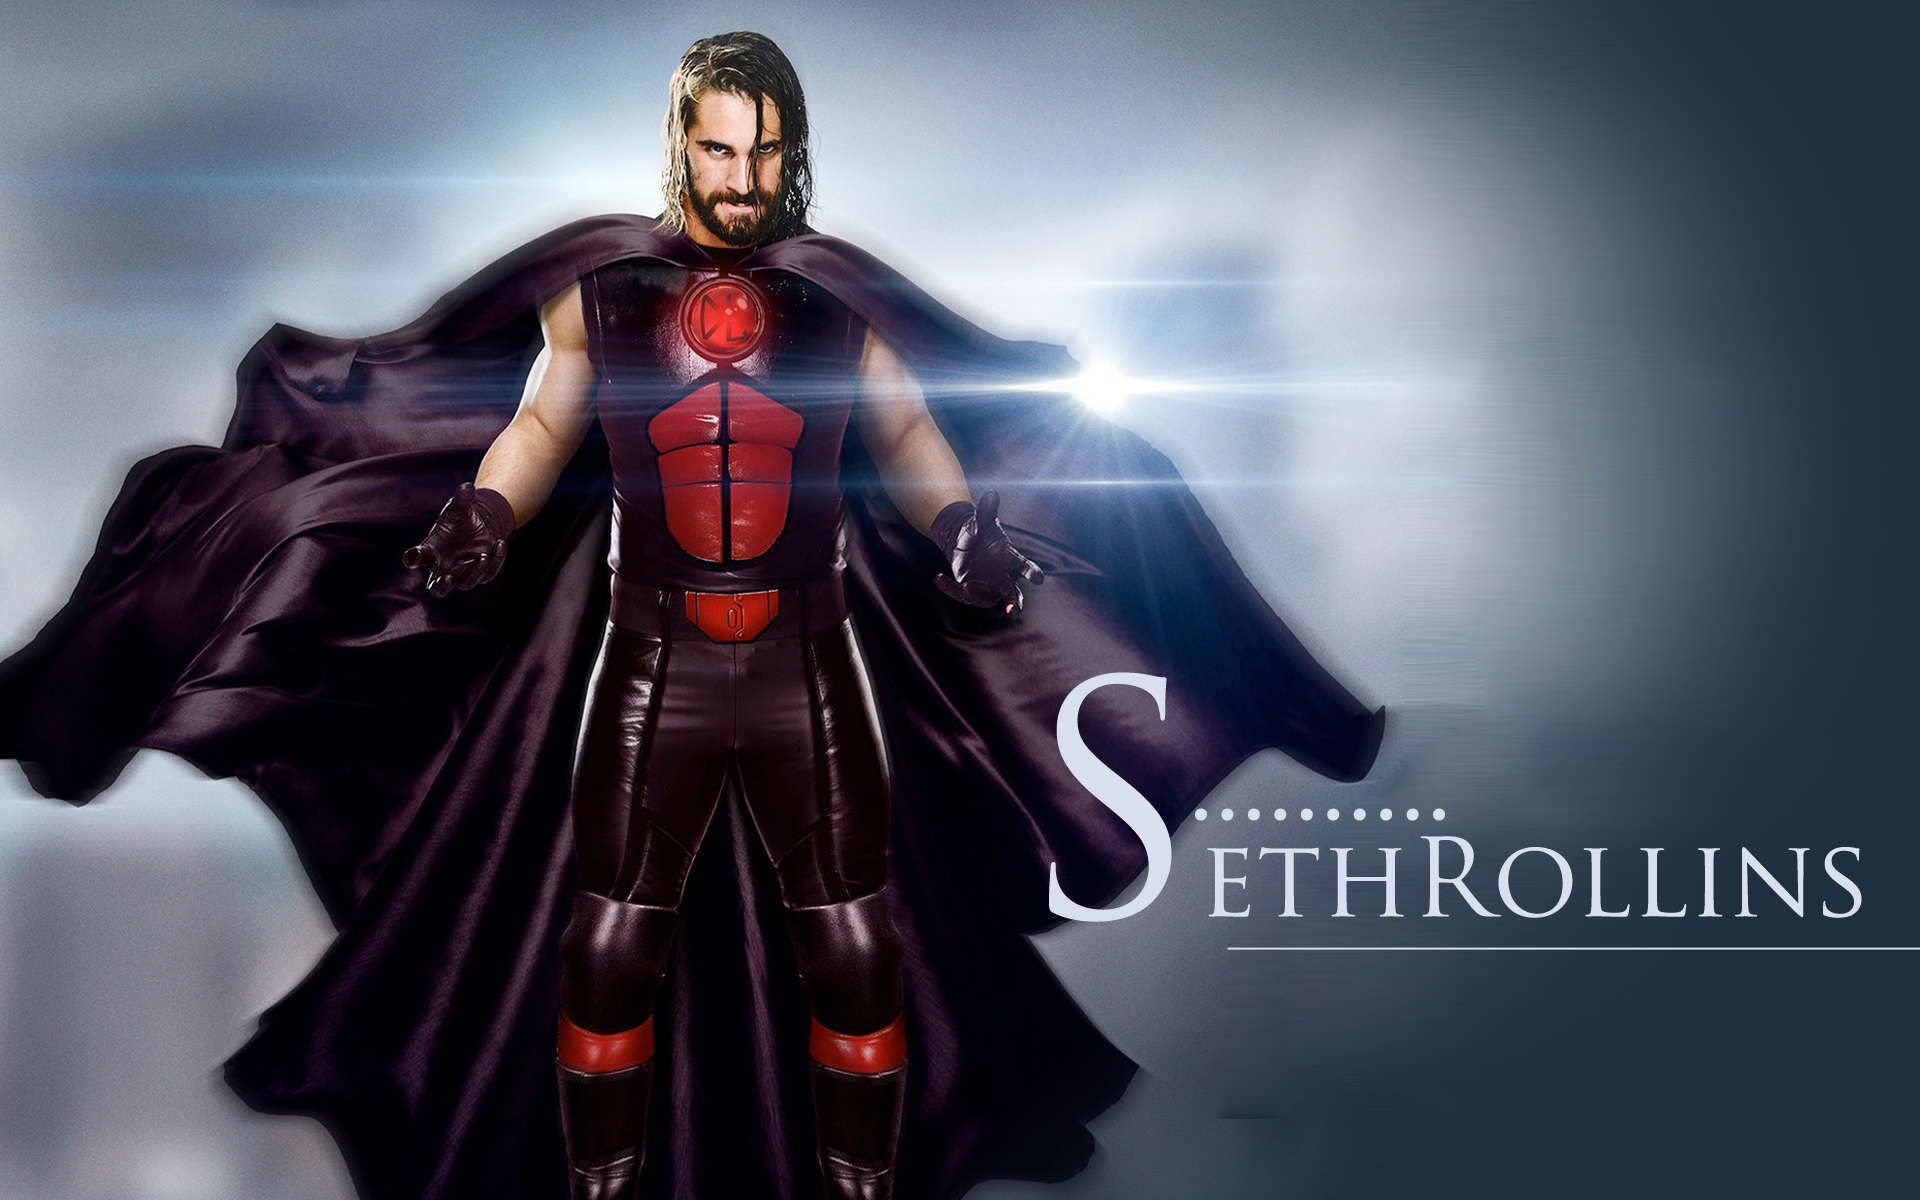 Free Download Seth Rollins Hd Images 1 1920x1200 For Your